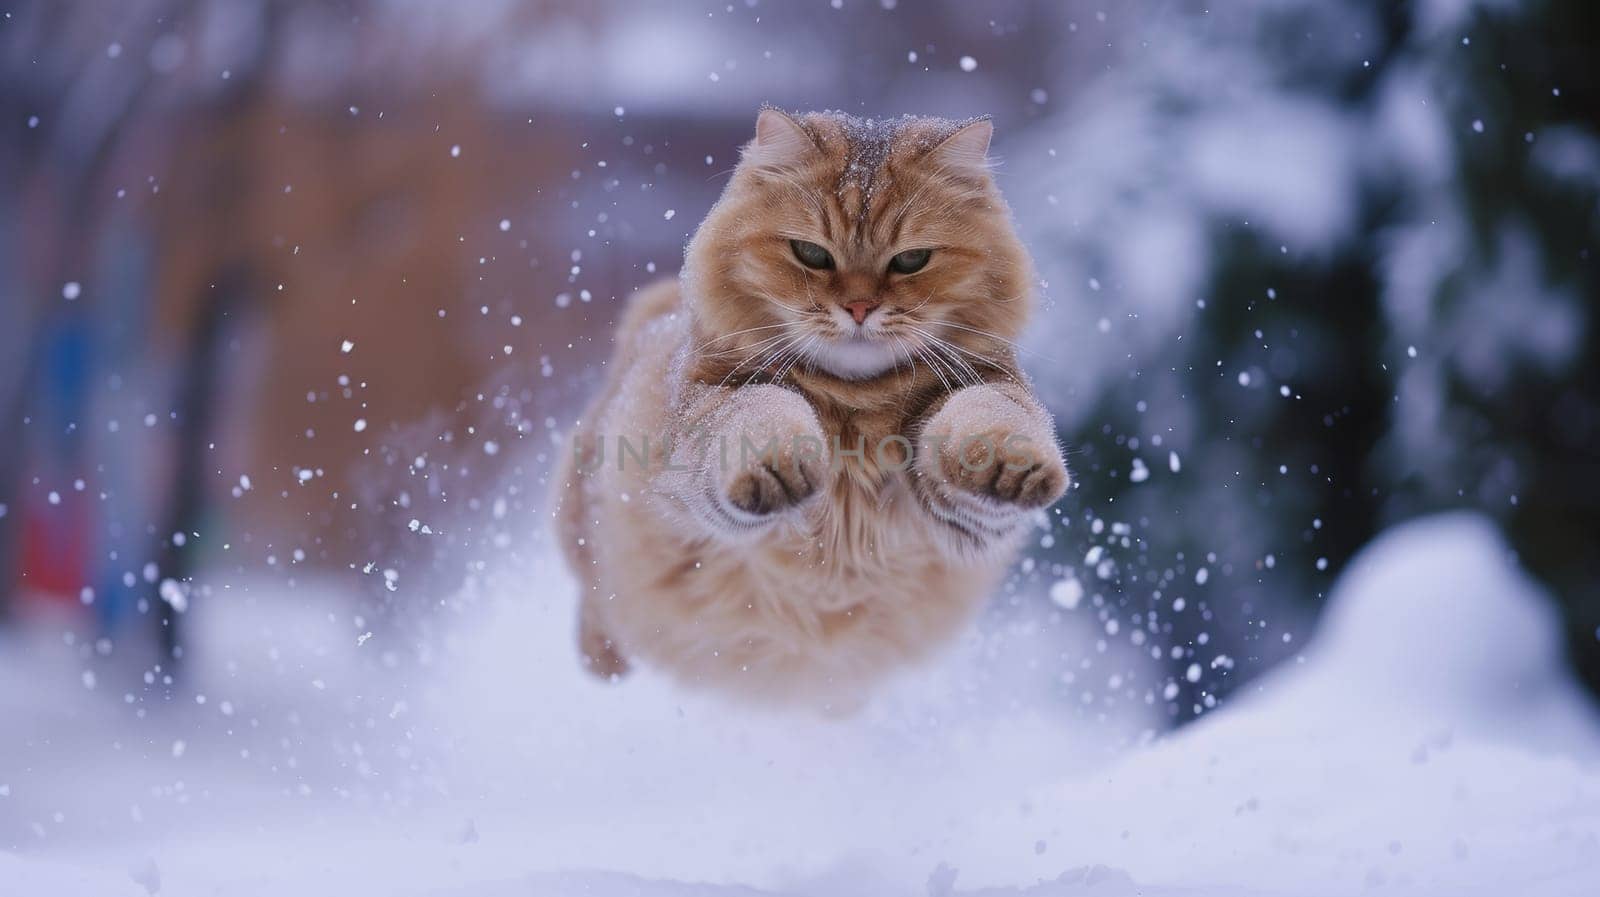 A cat jumping in the air while snow is falling